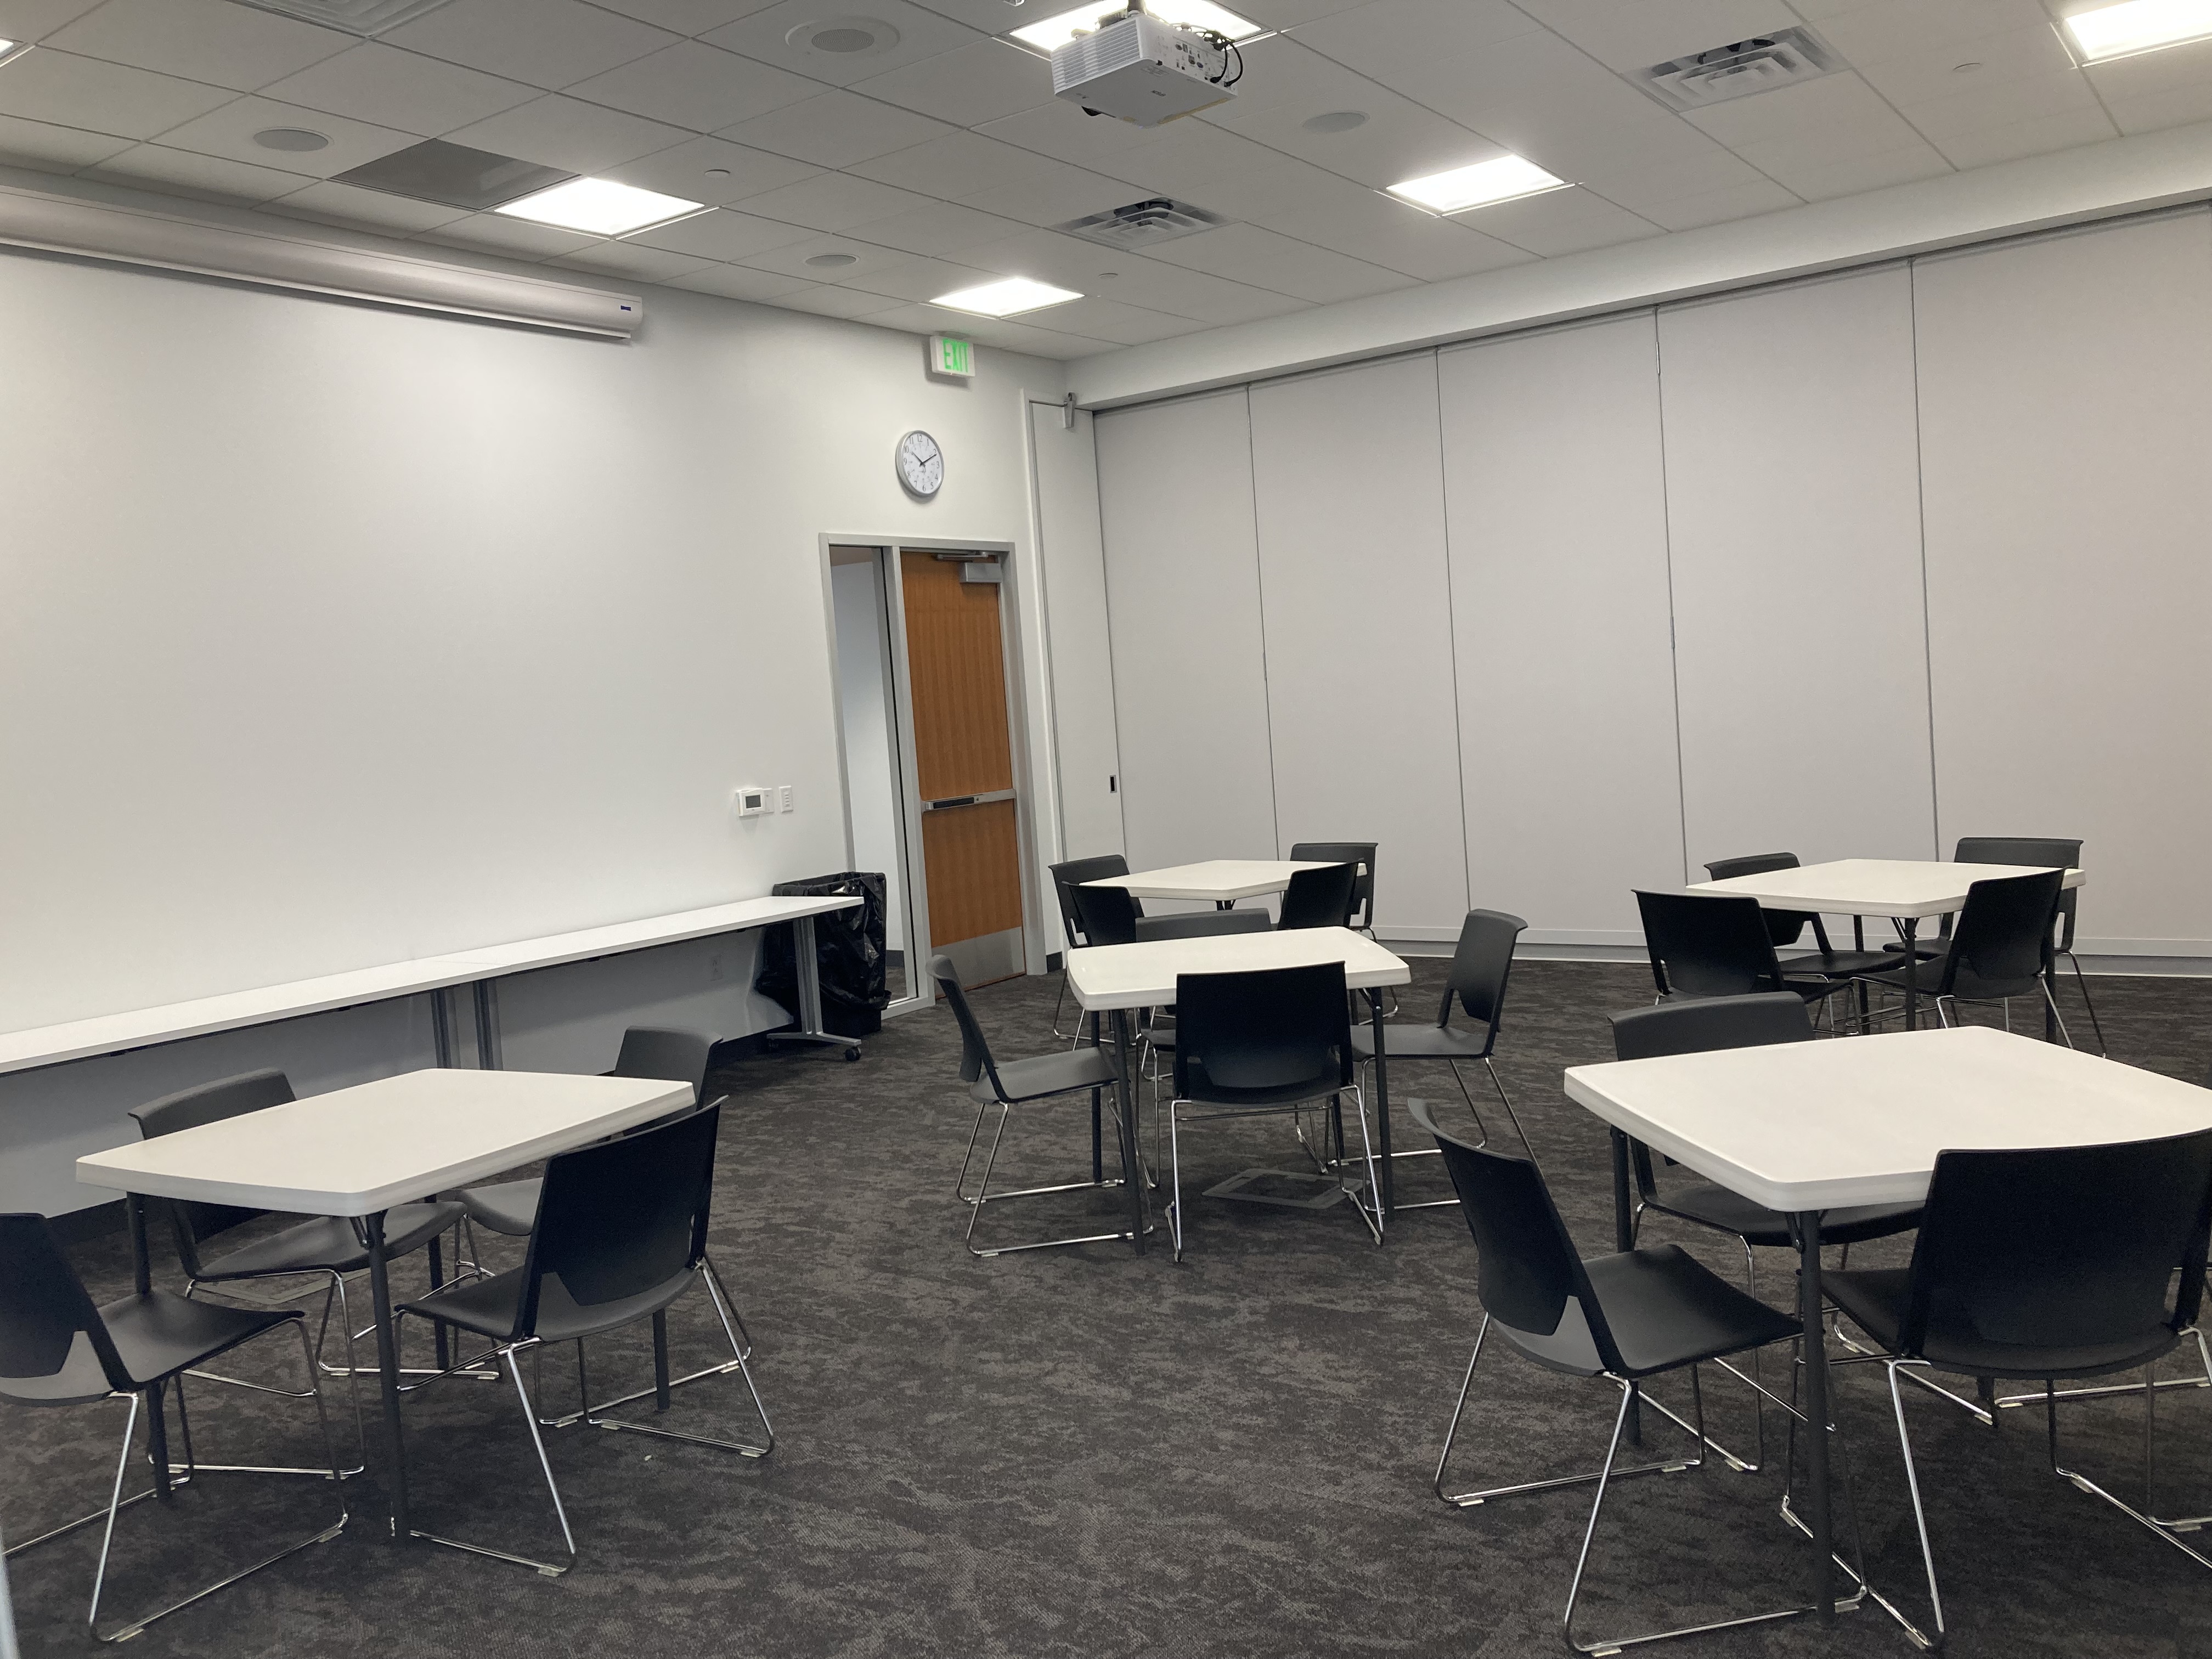 Image of Meeting Room B from the front, right-hand side looking towards the back left corner.